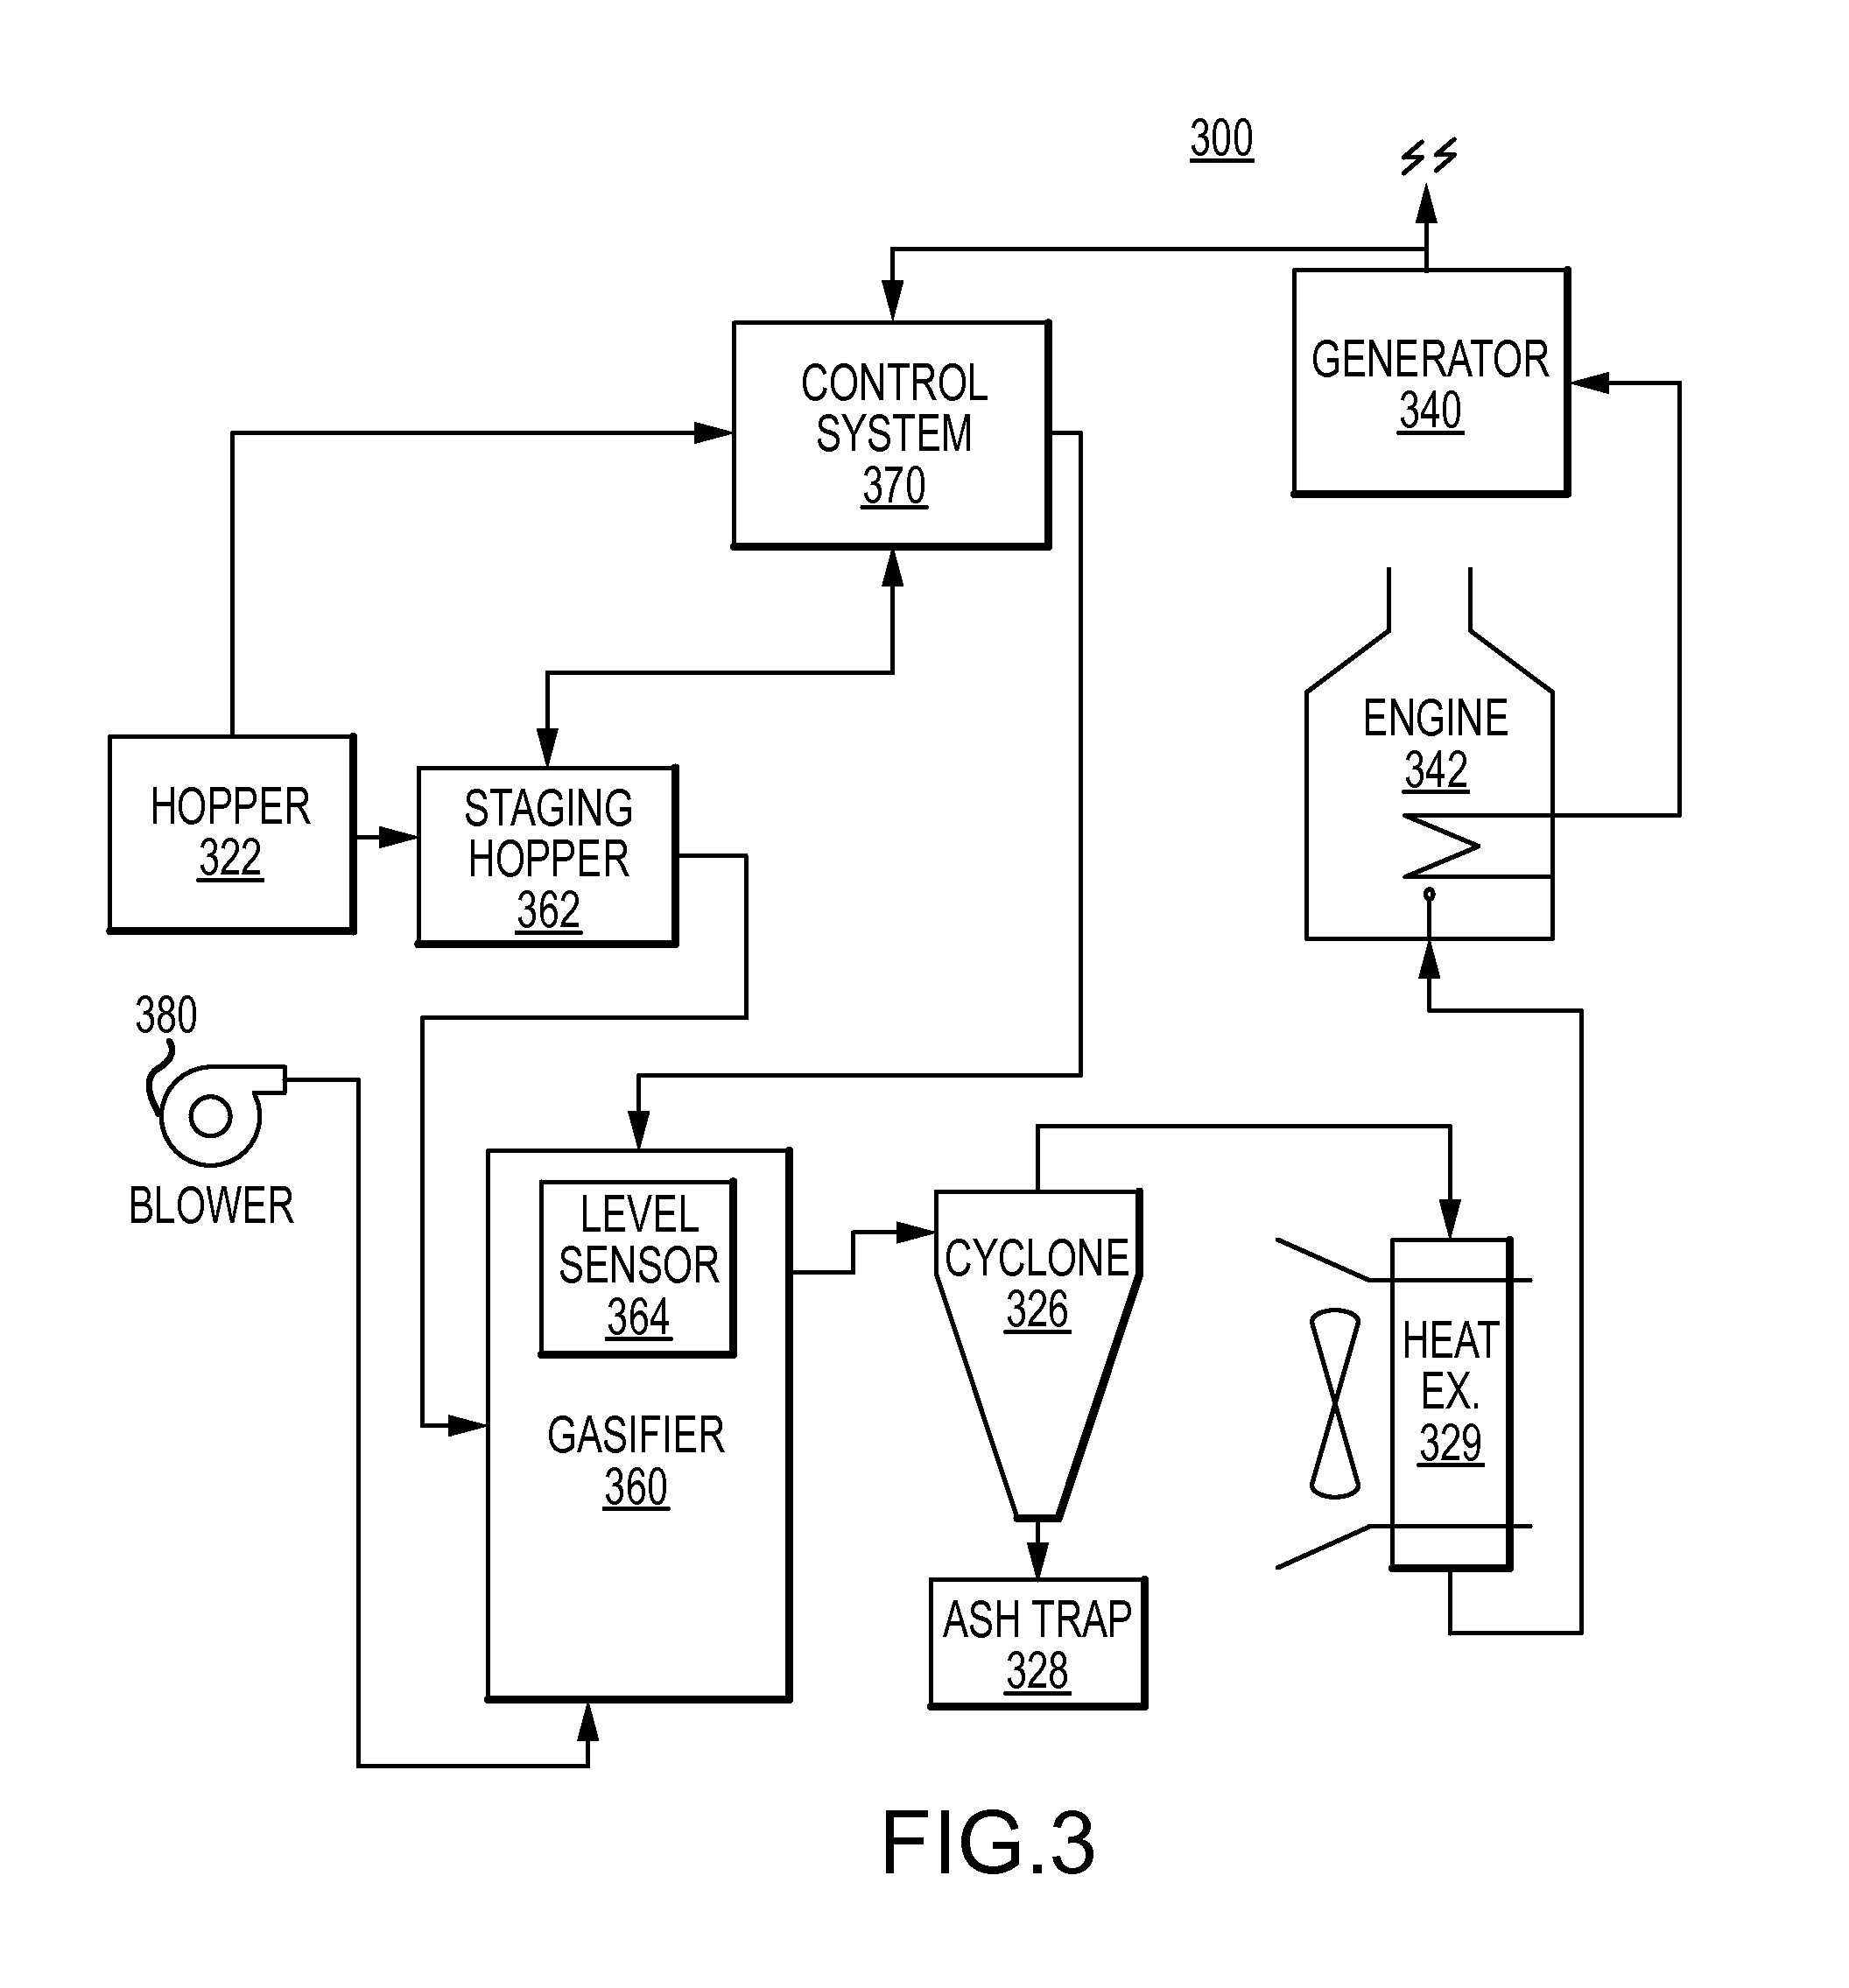 Apparatuses, systems, mobile gasification systems, and methods for gasifying residual biomass